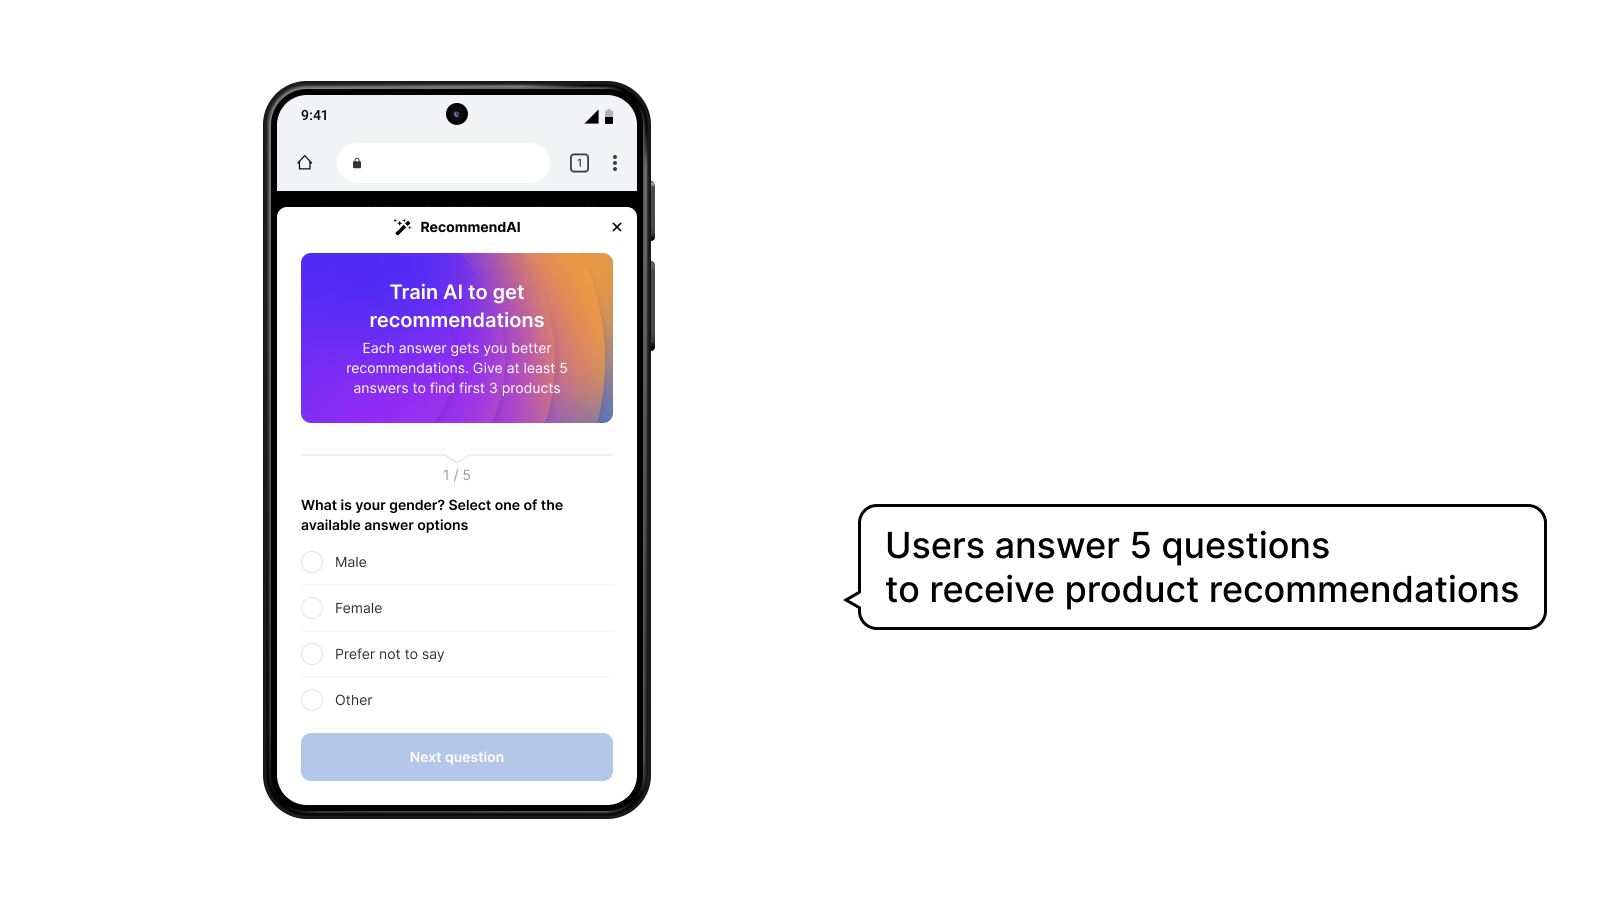 Users answer 5 questions to receive product recommendations